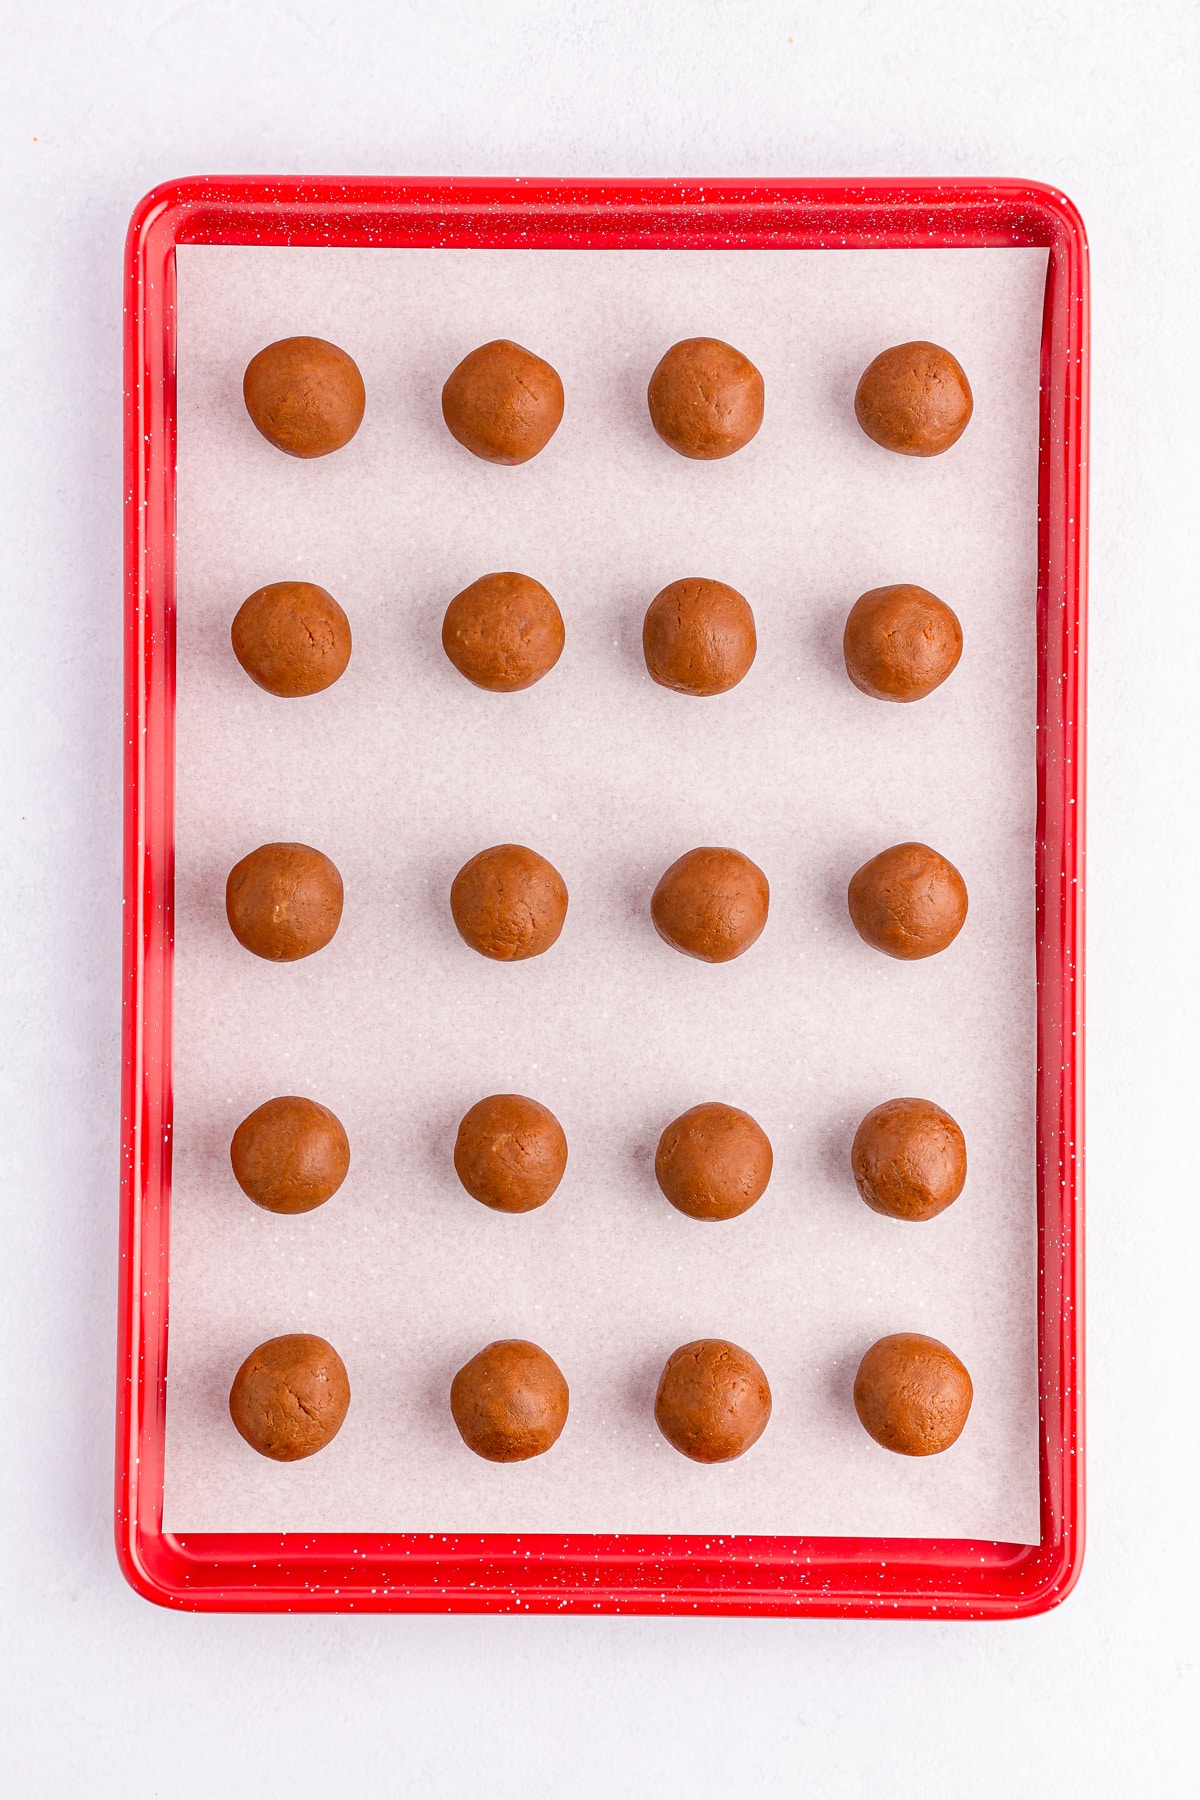 Another process in preparing Biscoff Truffles is to form it into balls and put them in a tray to chill.